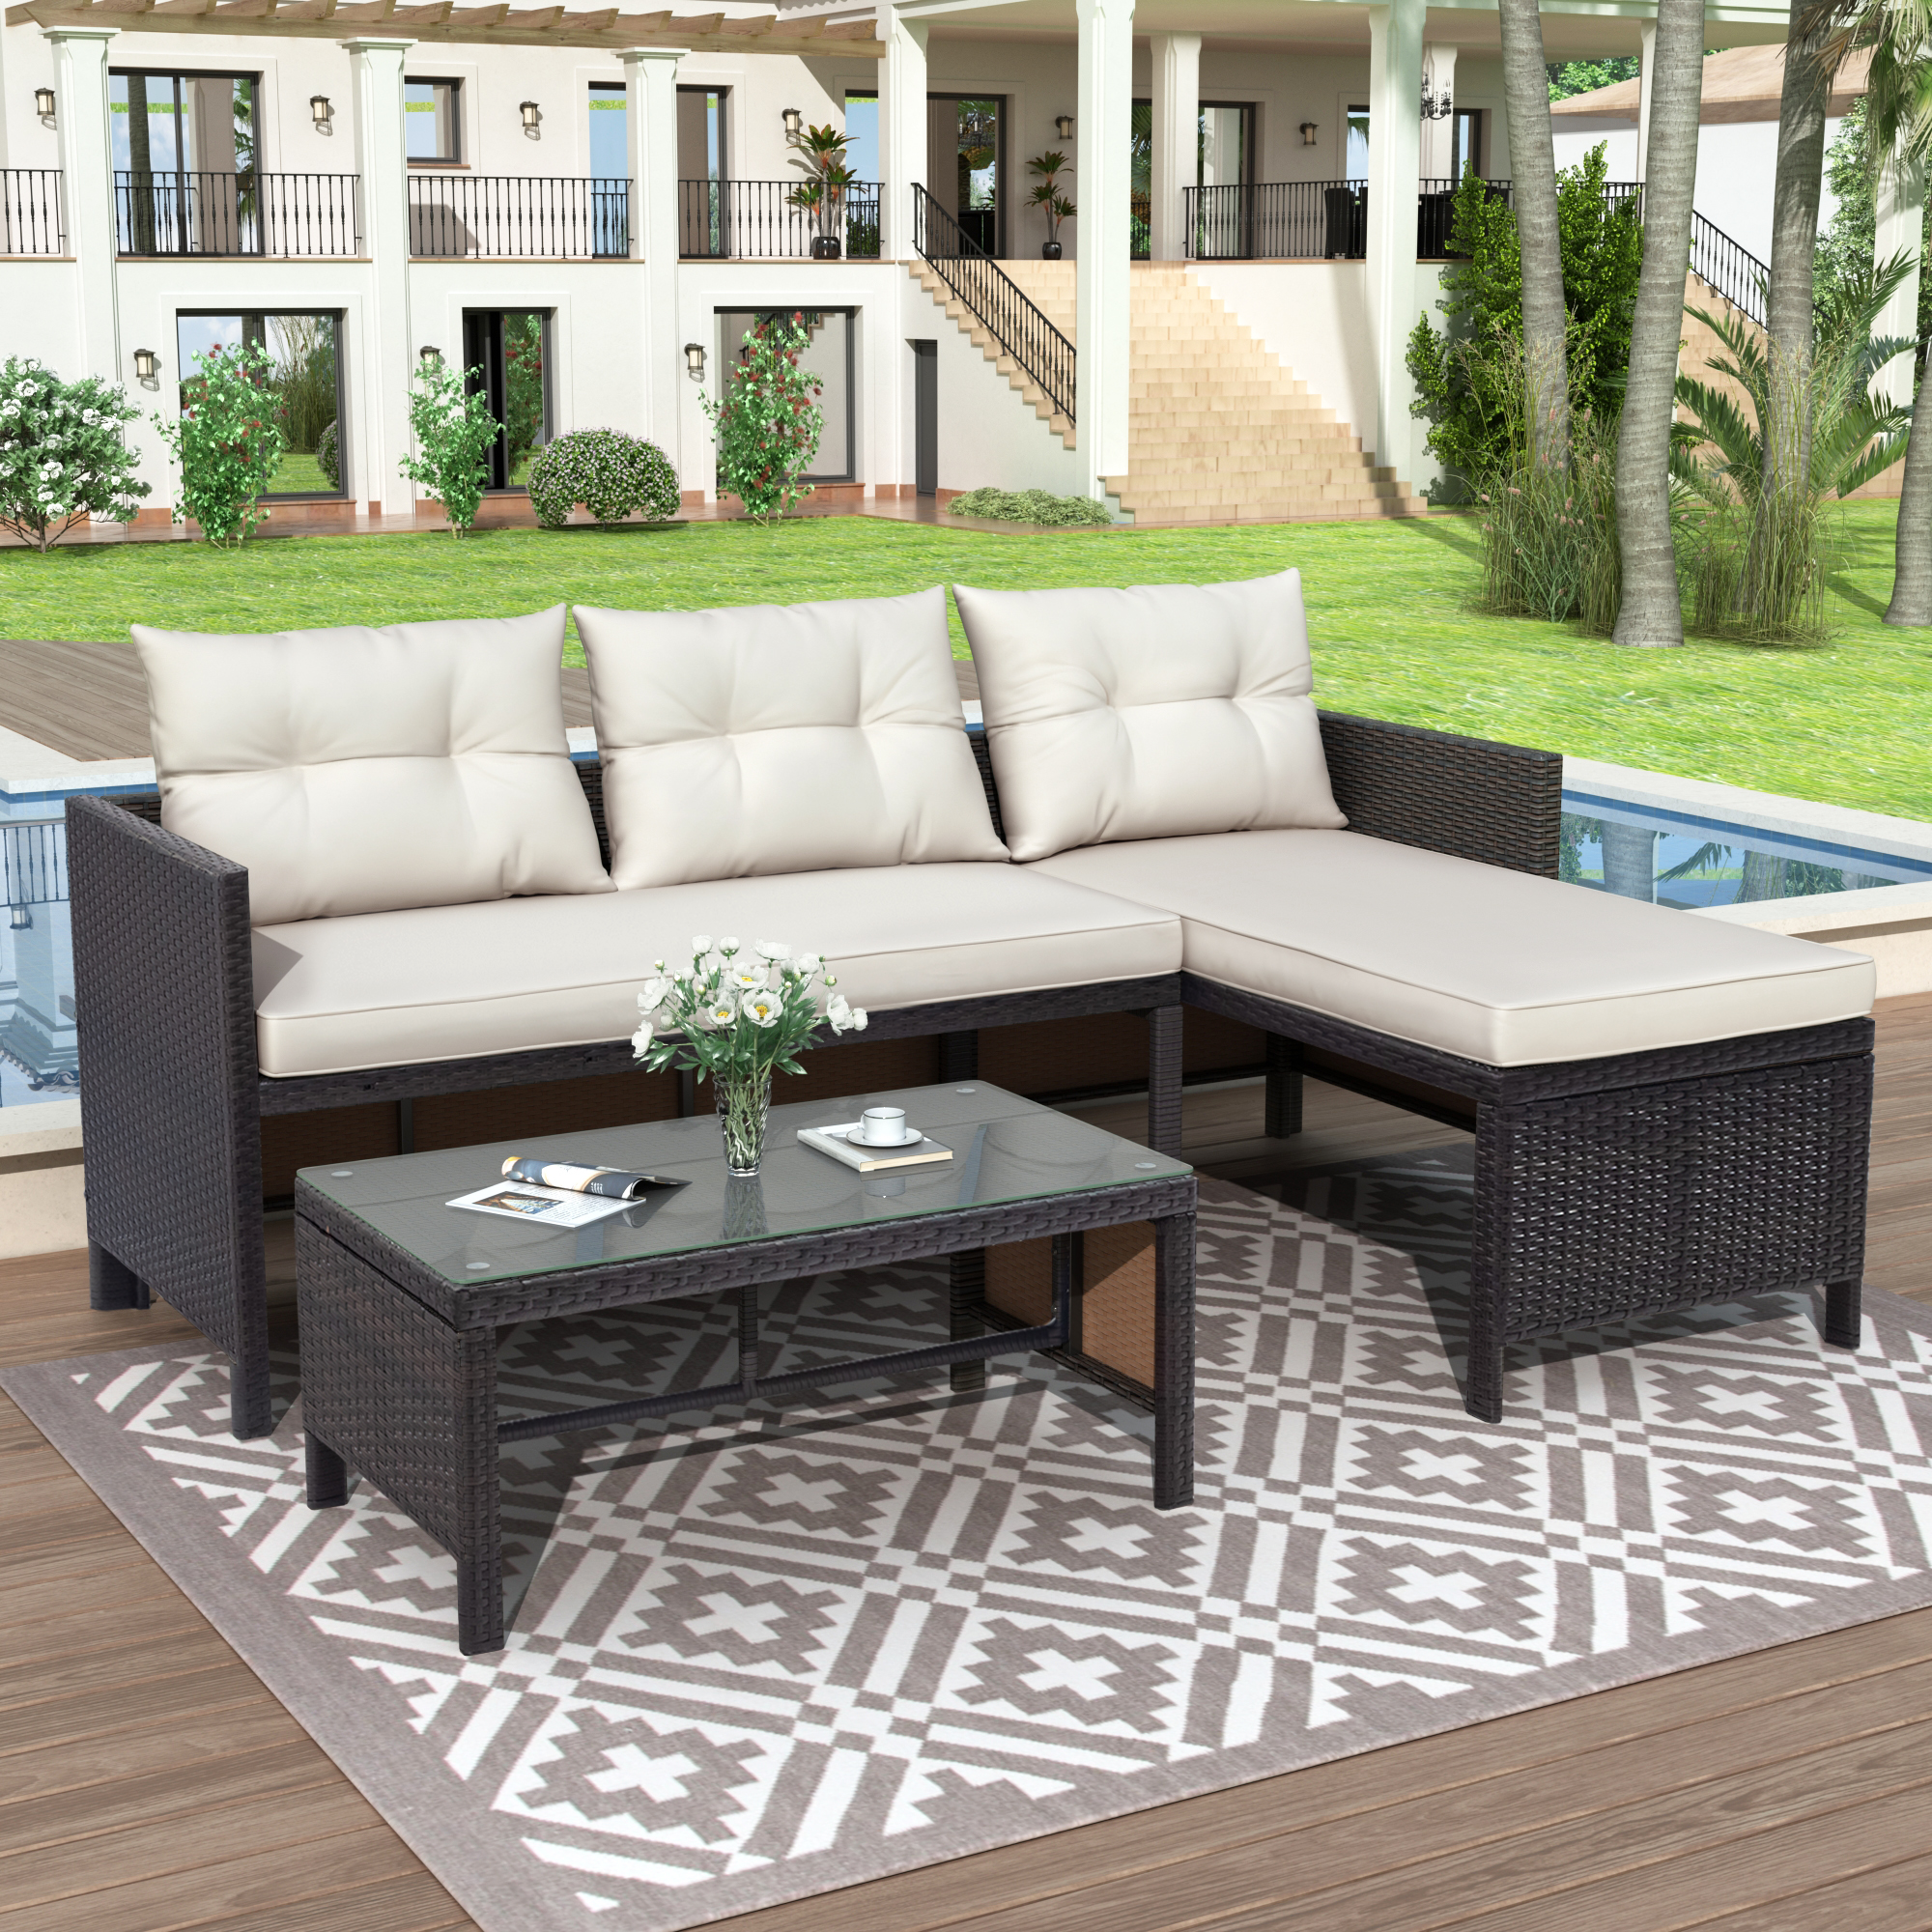 Patio Furniture Sectional Set, 3 Pieces PE Wicker Cushioned Sofa Set, Outdoor Conversation Chair Set with Two-Seater Sofa, Lounge Sofa and Coffee Table, for Backyard, Poolside, Garden, Deck, D6029 - image 3 of 10